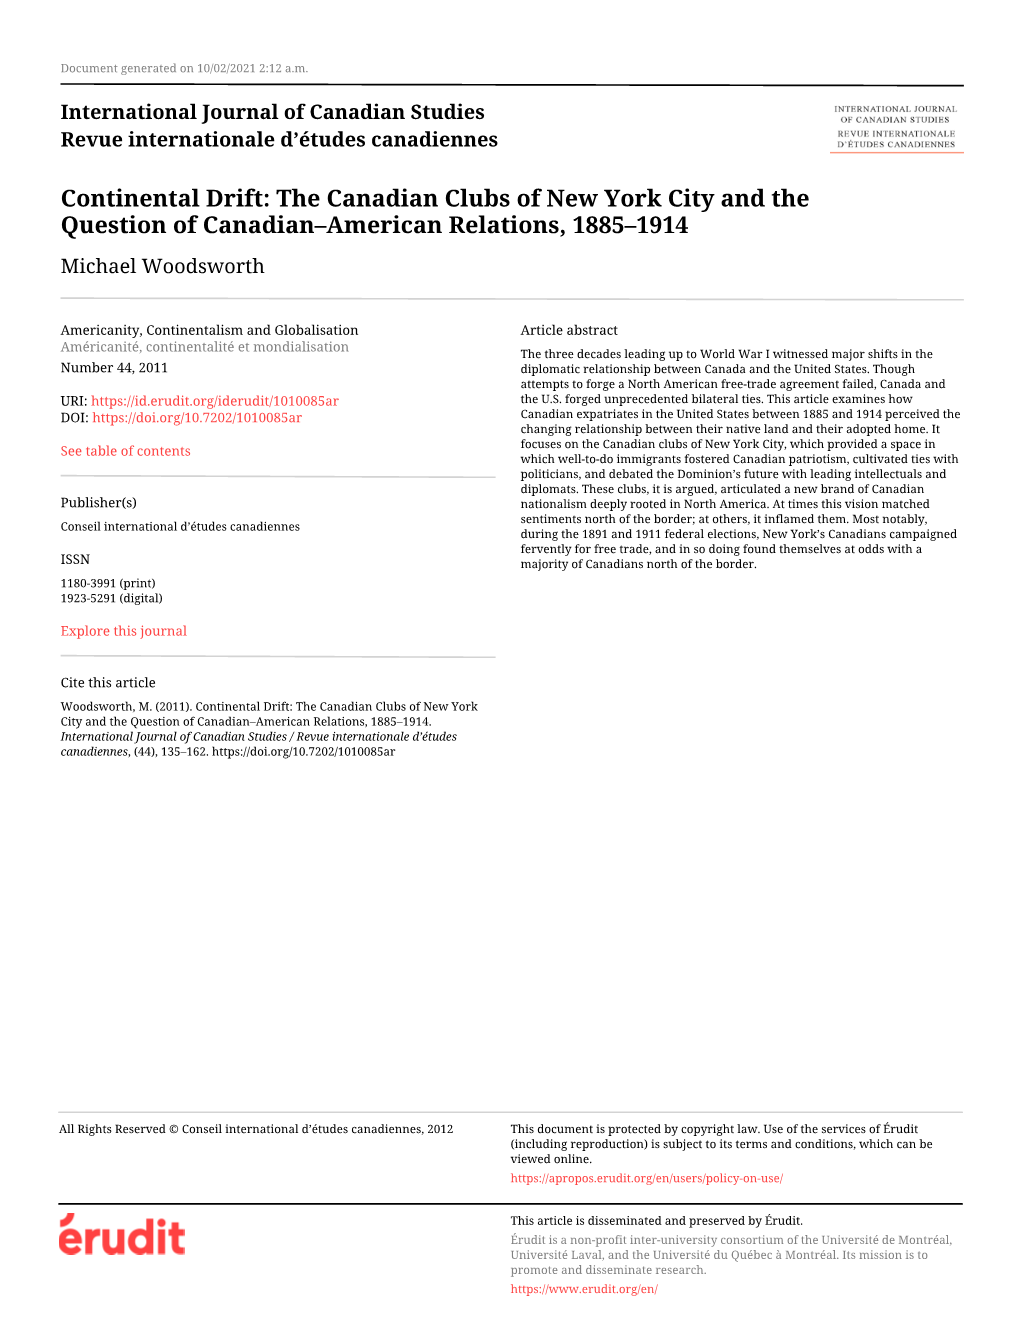 Continental Drift: the Canadian Clubs of New York City and the Question of Canadian–American Relations, 1885–1914 Michael Woodsworth